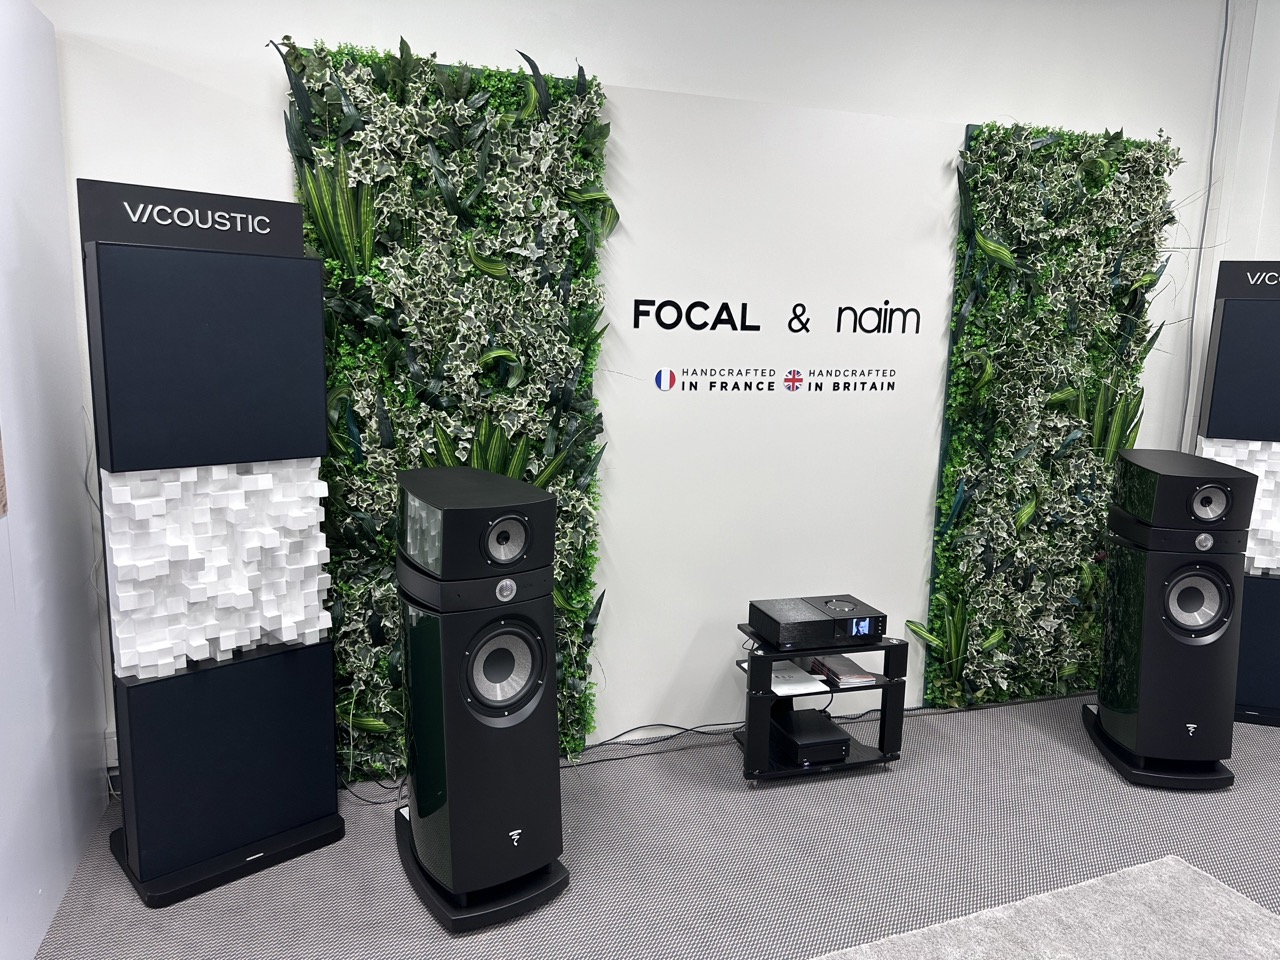 Focal had joined up with Naim. Great to think that we supply some the parts that go into Focal speakers.